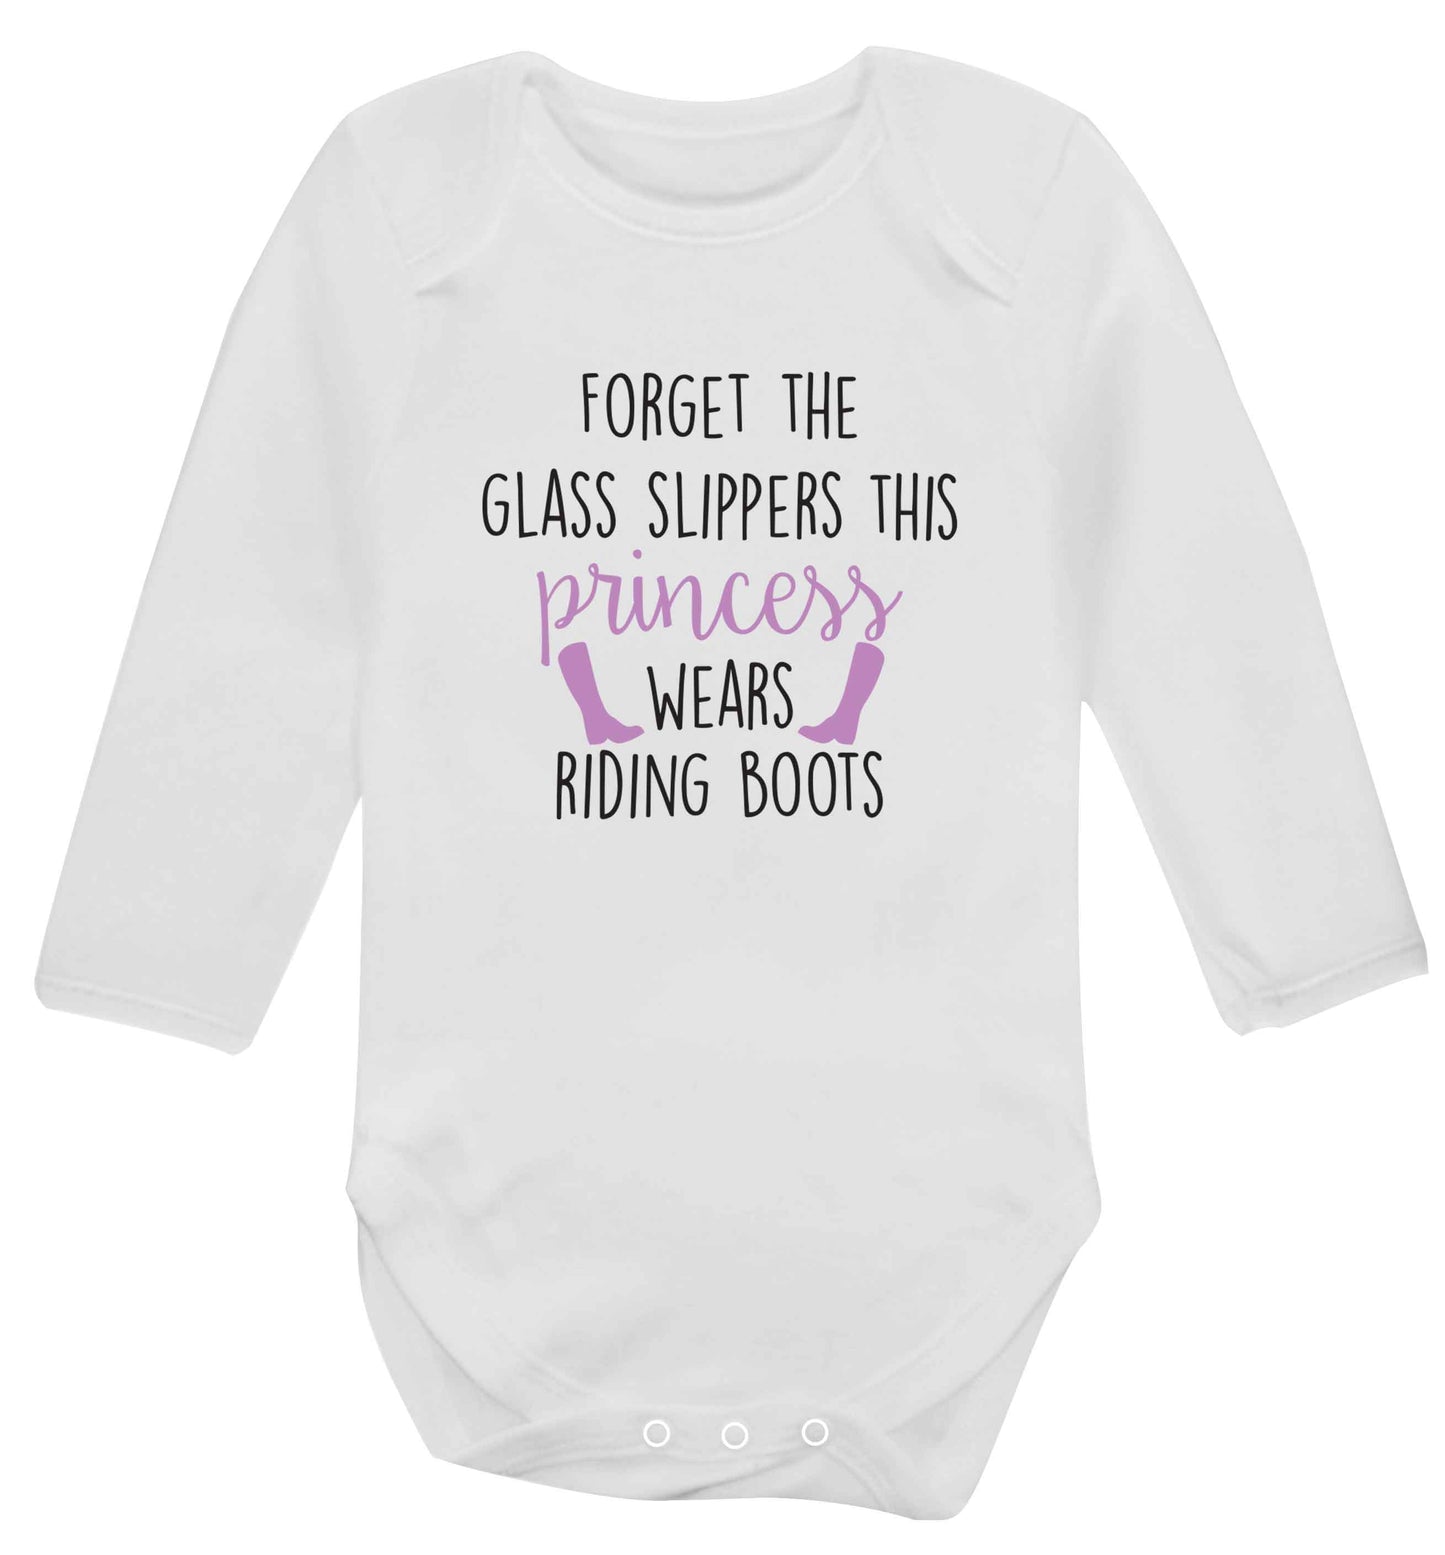 Forget the glass slippers this princess wears riding boots baby vest long sleeved white 6-12 months